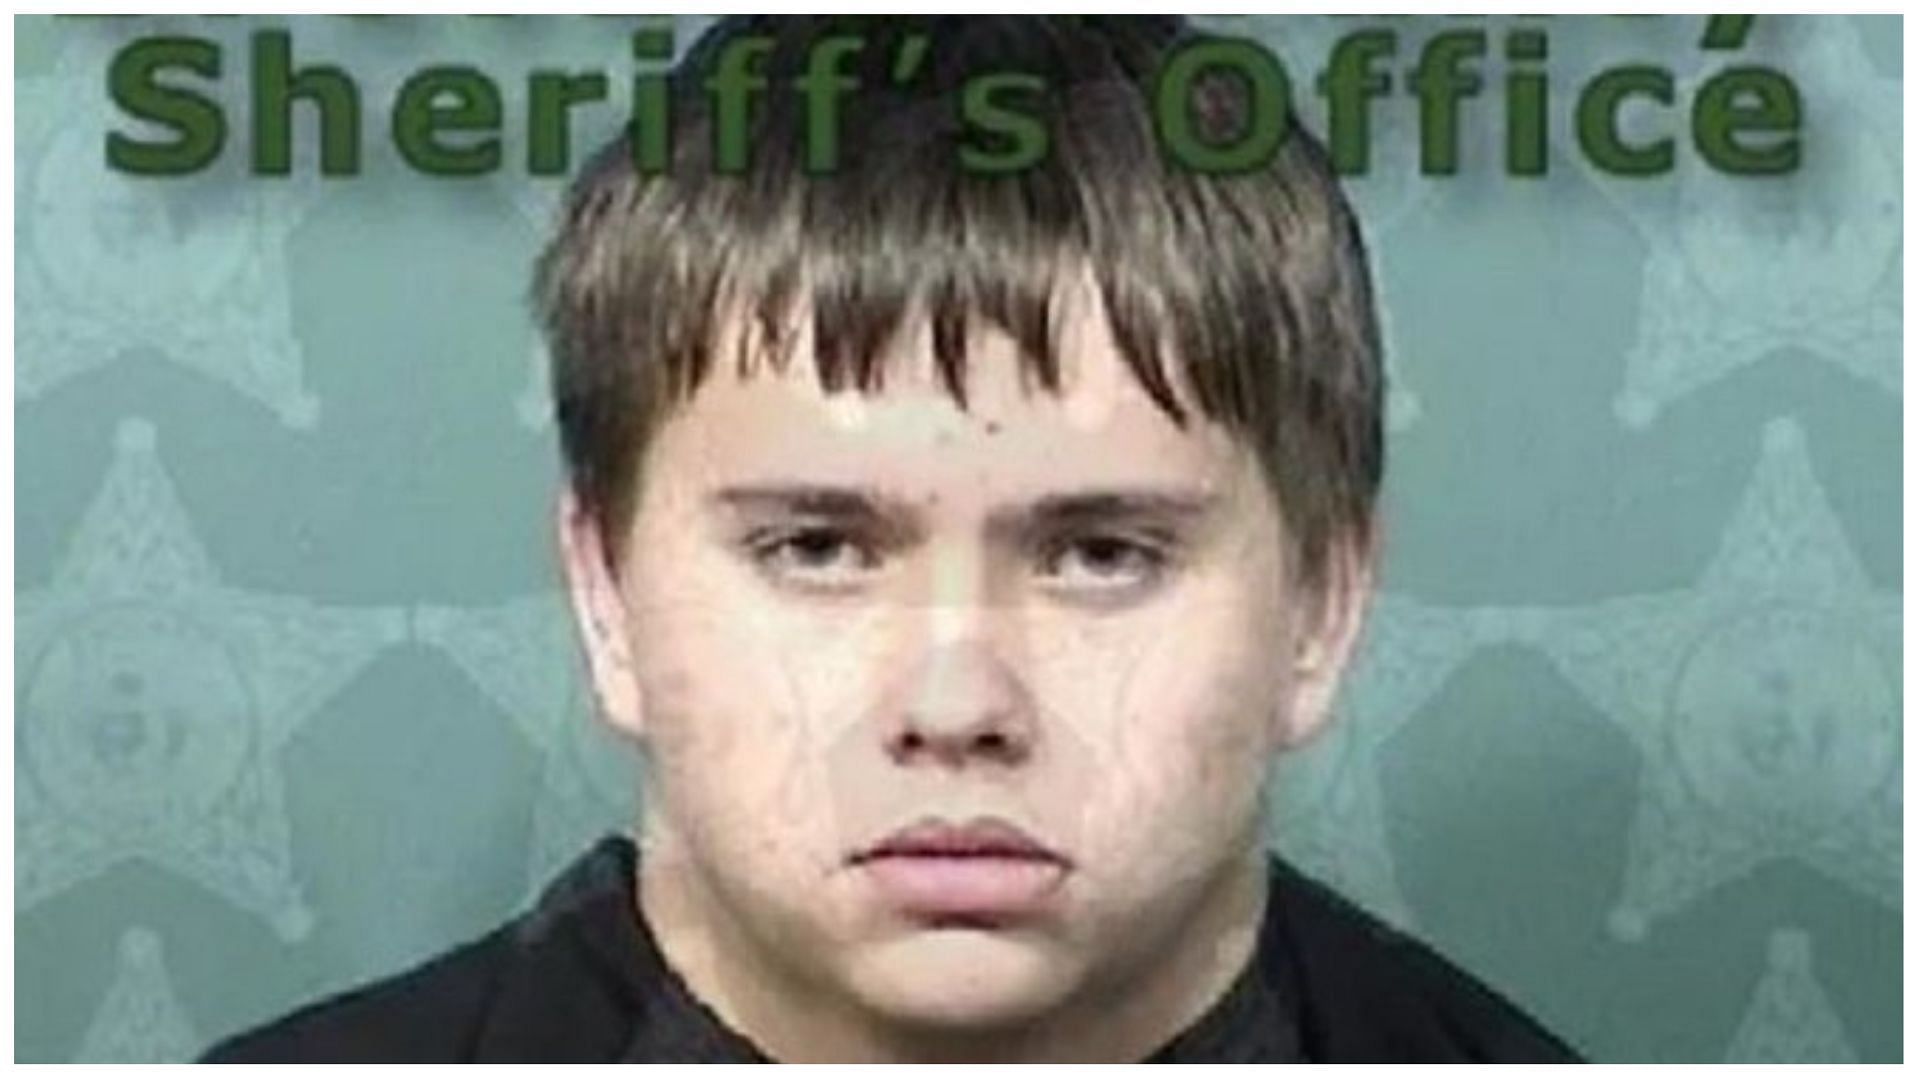 17-year-old Florida teenager Tobias Jacob Brewer arrested on charges of brutally hitting his mother, (Image via Brevard County Sheriff